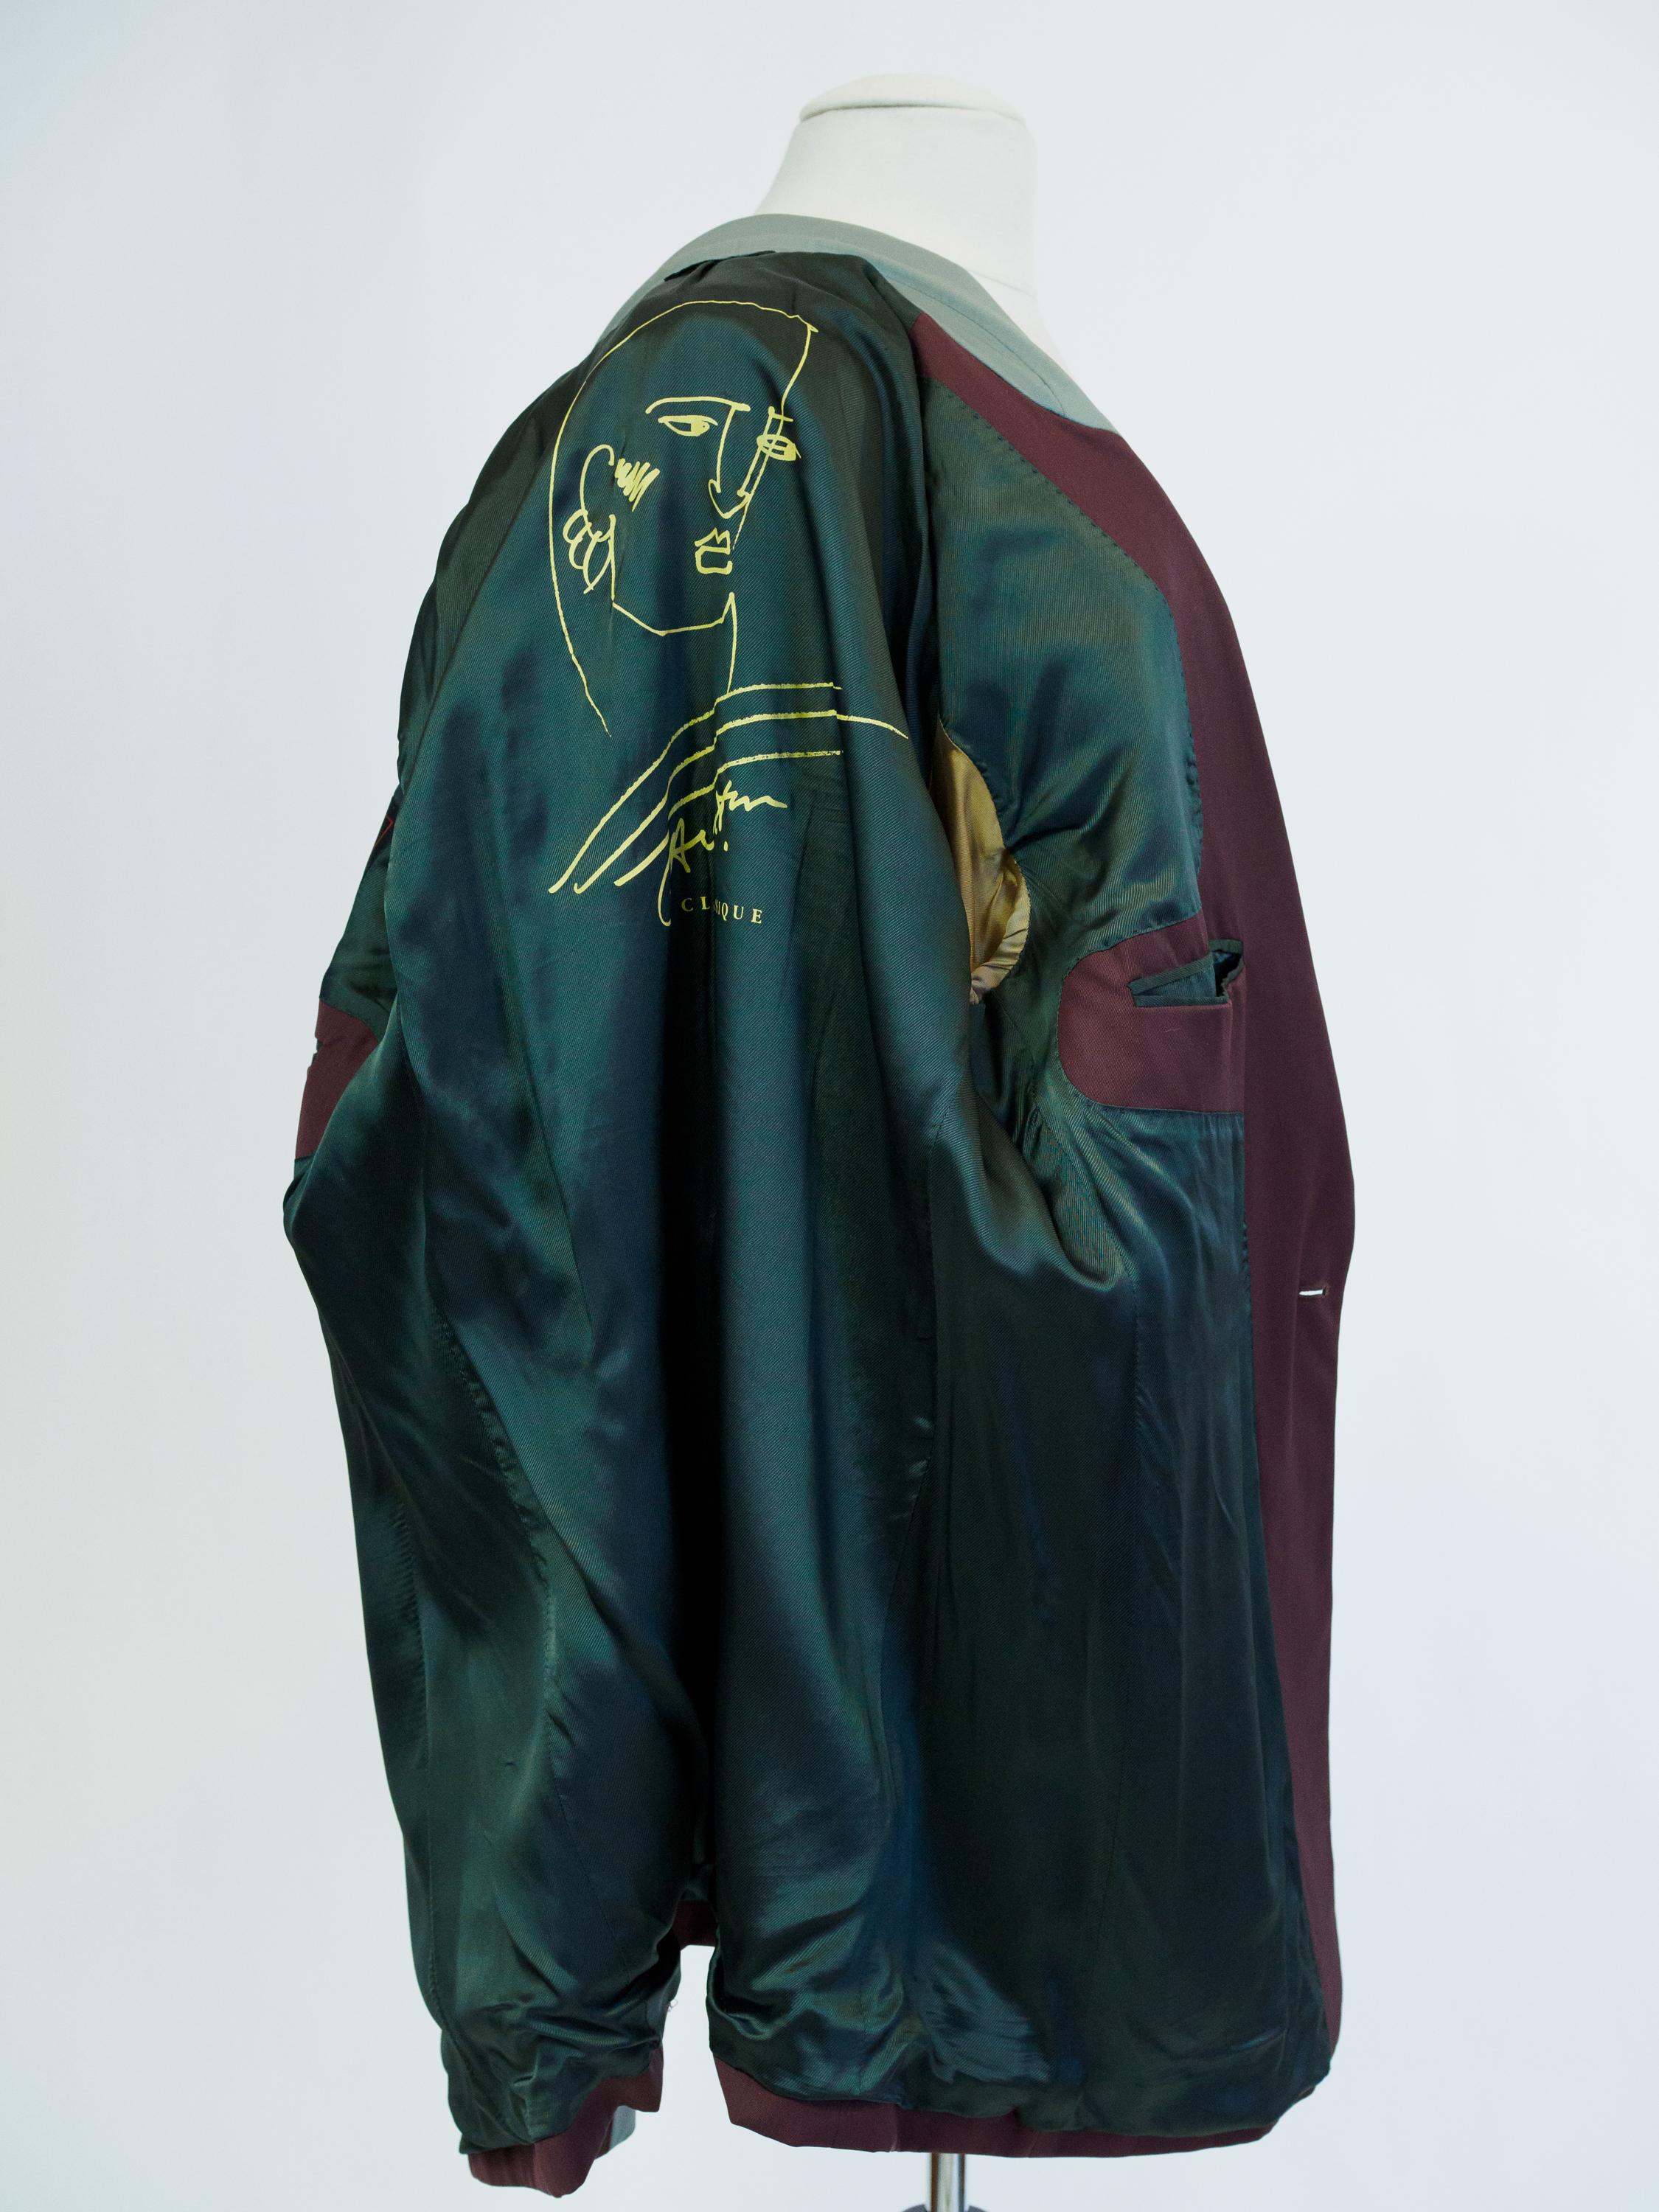 Jean-Paul Gaultier Jacket model 1057 with Cocteau-type effigy Circa 1995 For Sale 9